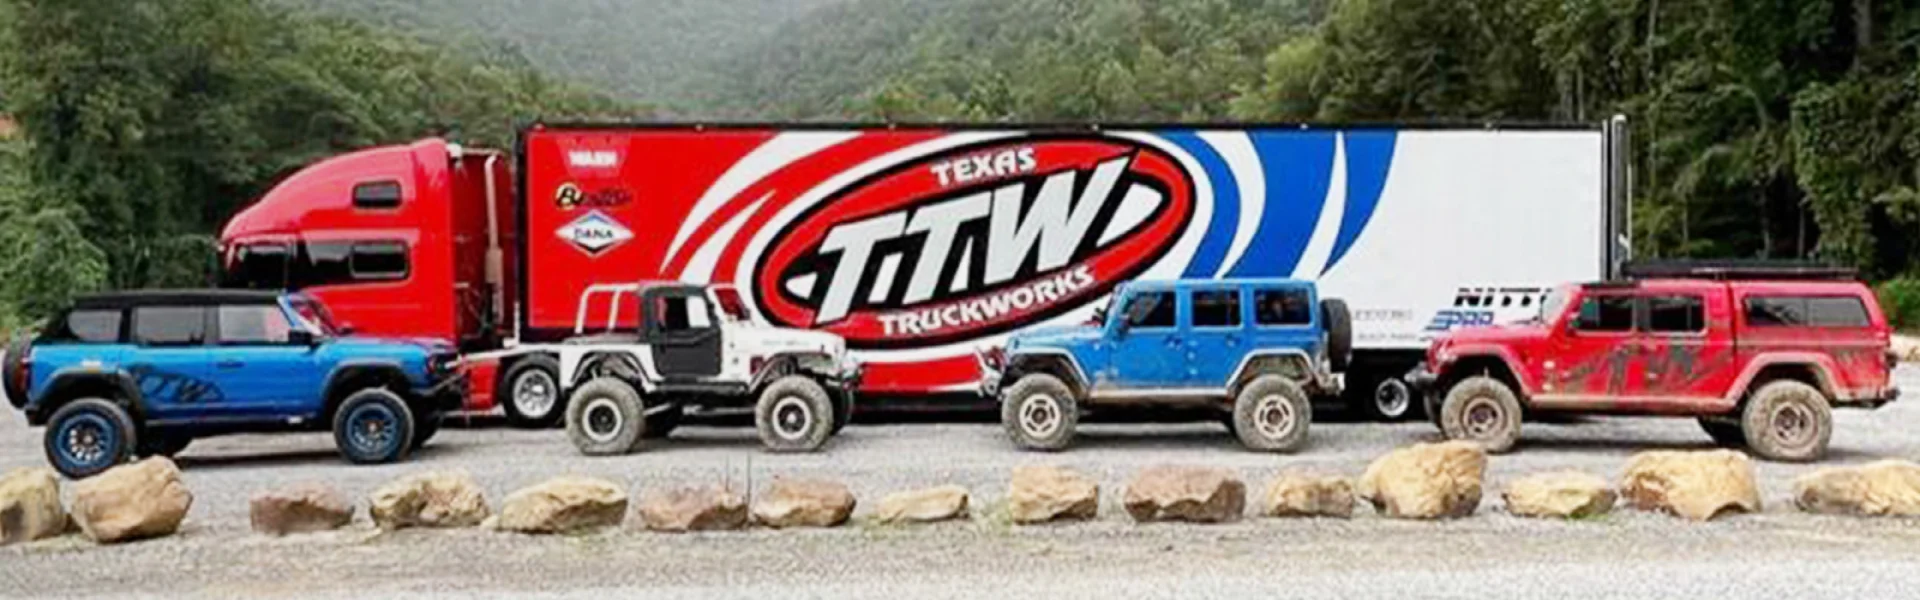 Find upcoming events at Texas Truck Works on their official website and their social media channels